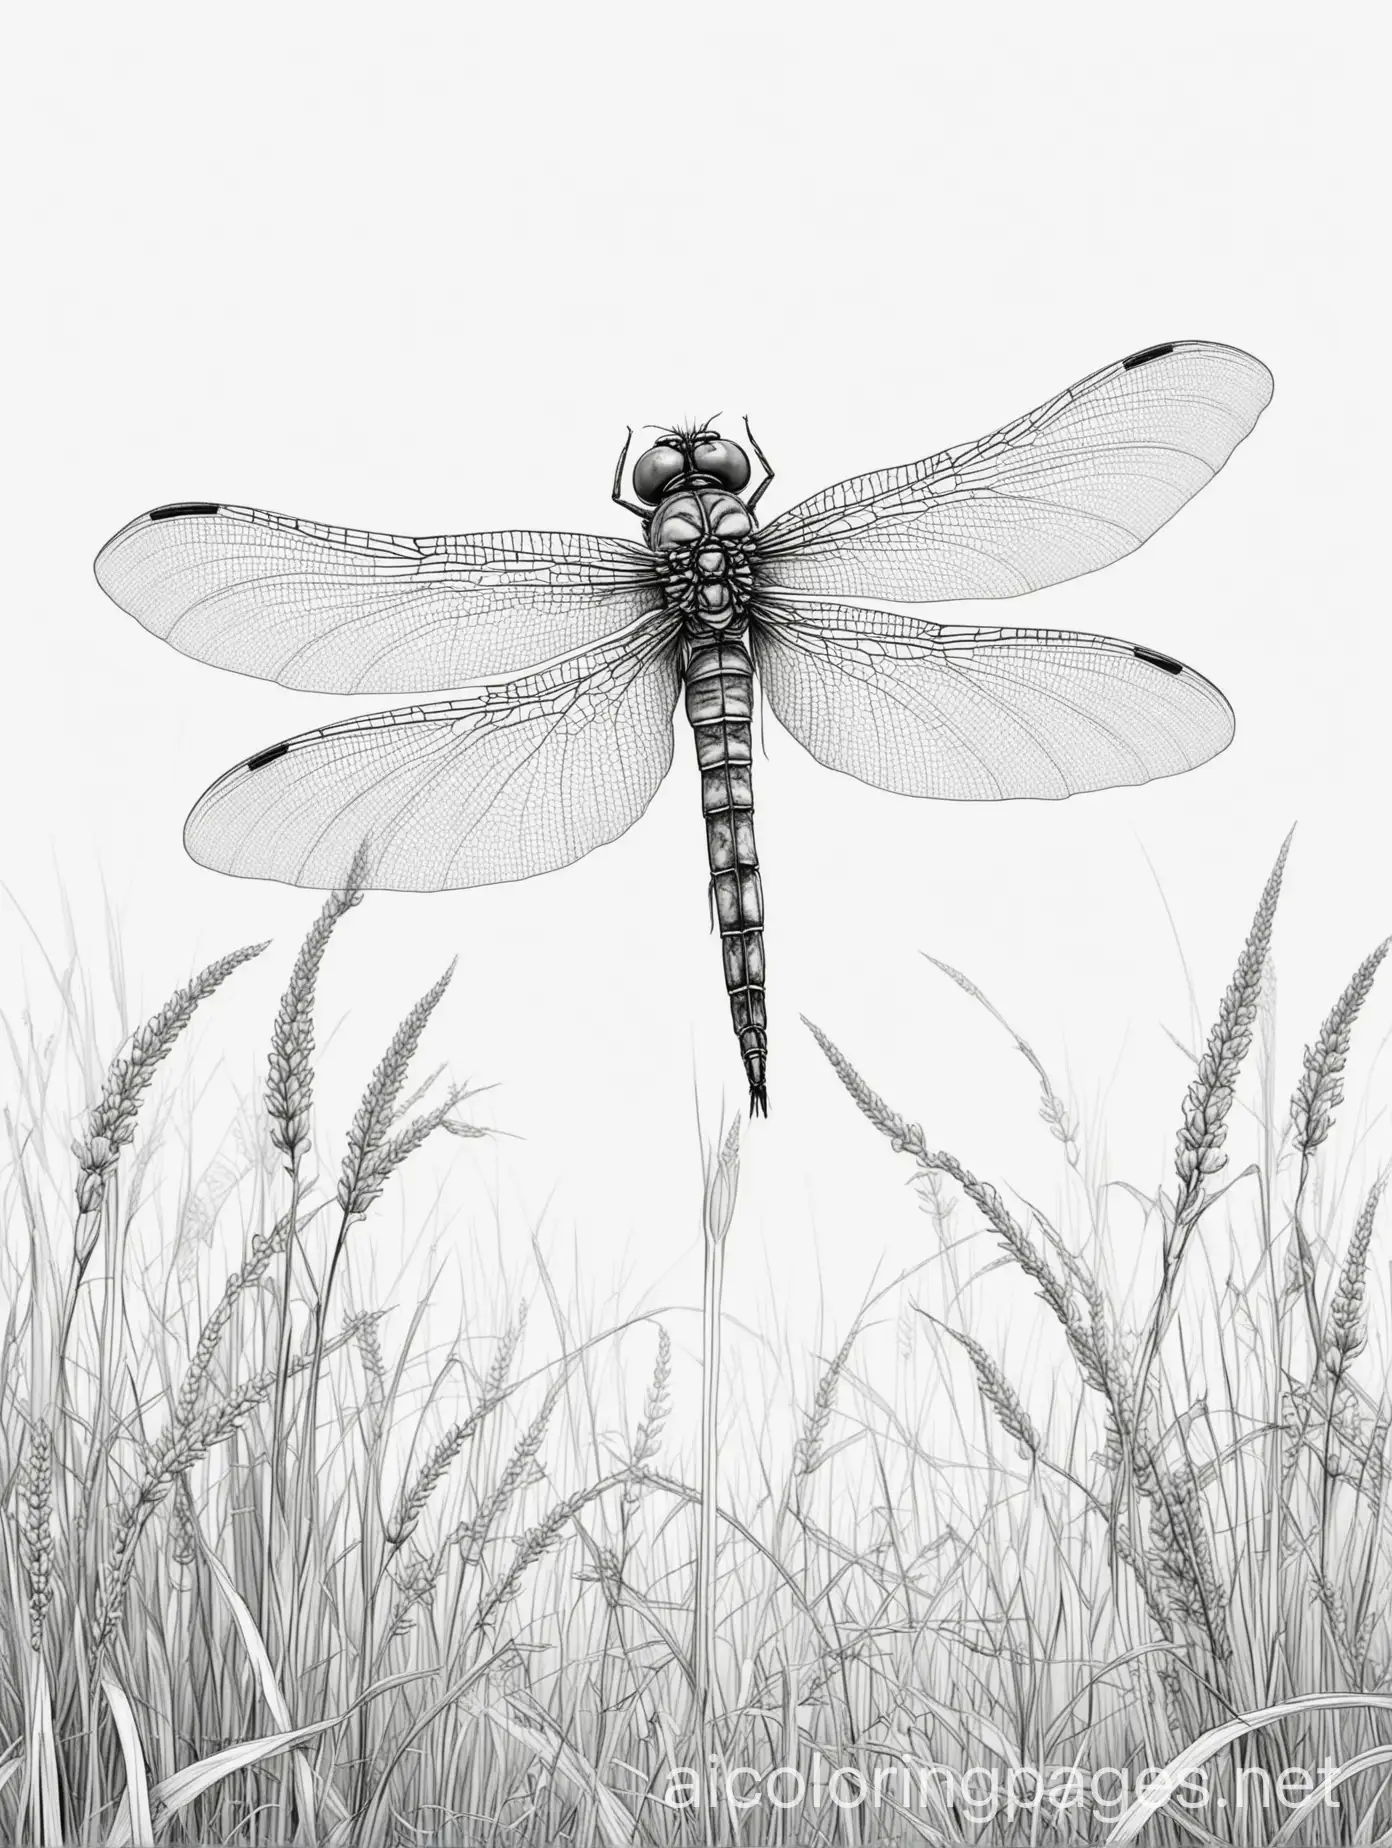 dragonfly on grass, Coloring Page, black and white, line art, white background, Simplicity, Ample White Space. The background of the coloring page is plain white to make it easy for young children to color within the lines. The outlines of all the subjects are easy to distinguish, making it simple for kids to color without too much difficulty